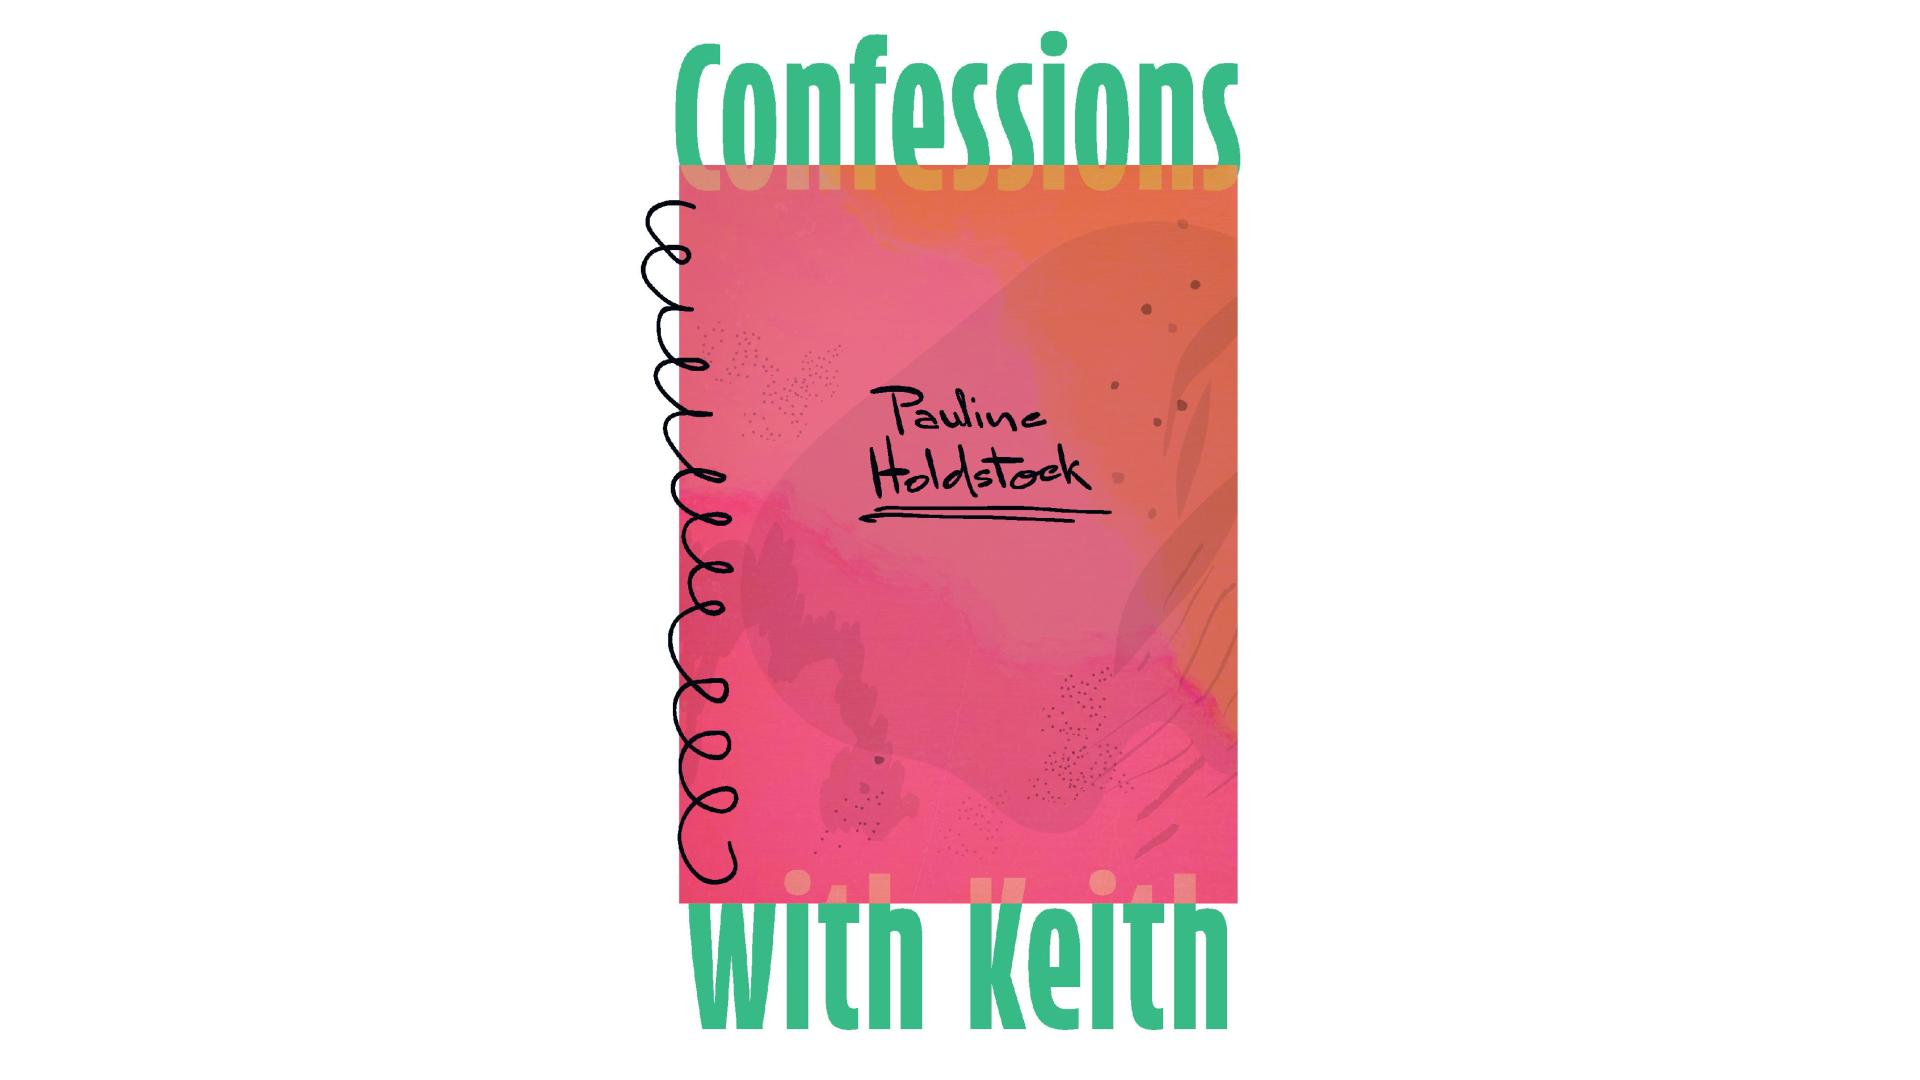 An image of the front cover of the book "Confessions with Keith" by Pauline Holdstock